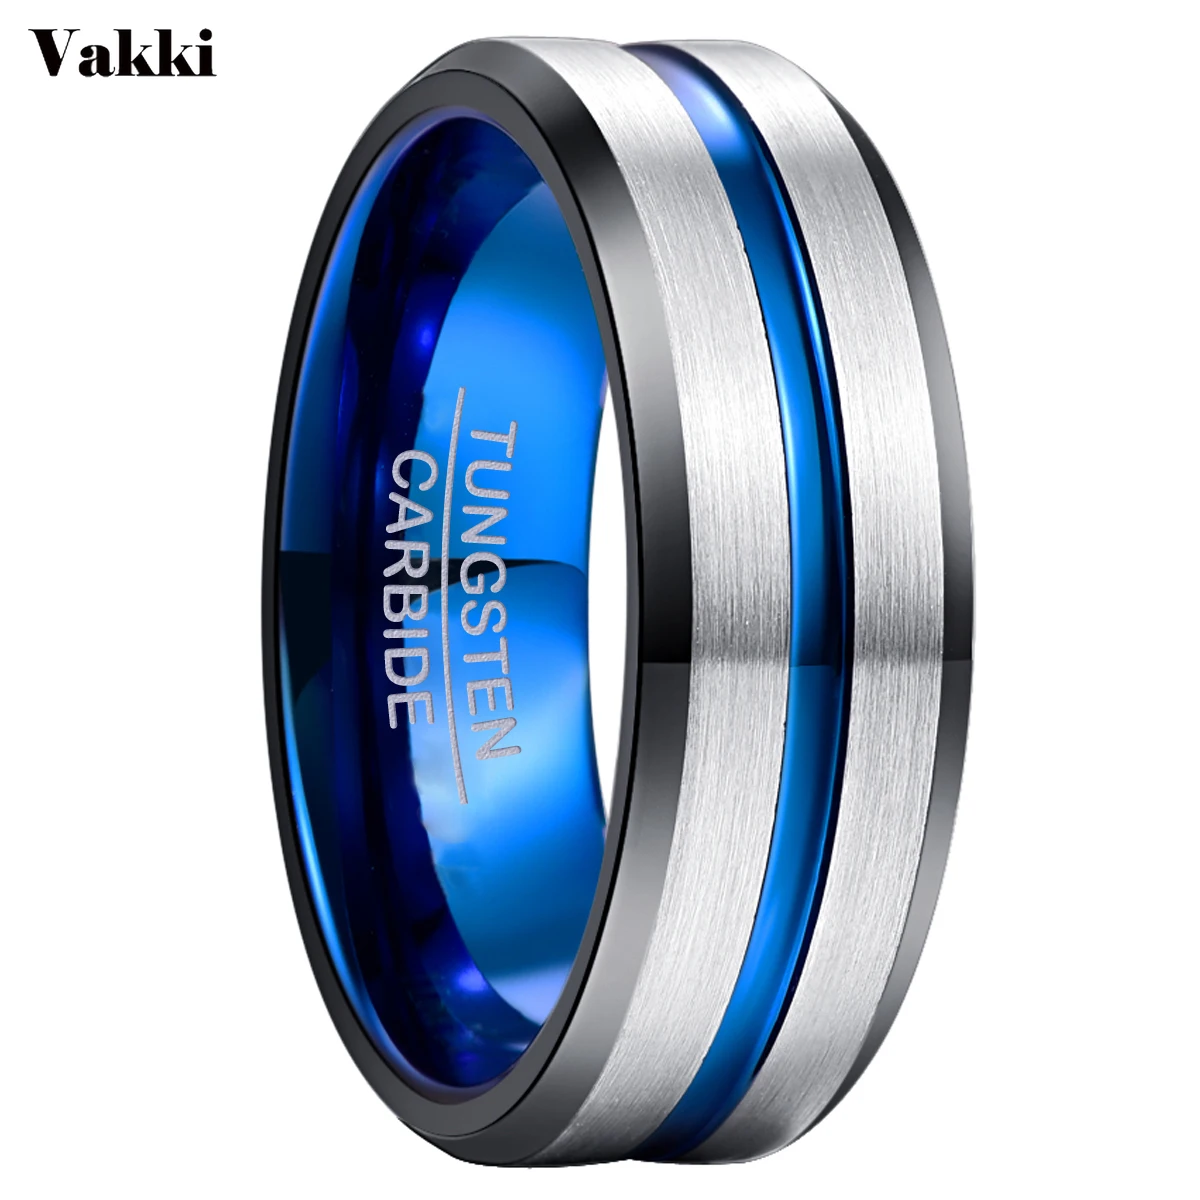 

VAKKI 8mm Width Tungsten Men's Ring Black Electroplated Inner Ring Bevel + Blue Groove / Steel Frosted Tungsten Steel Ring